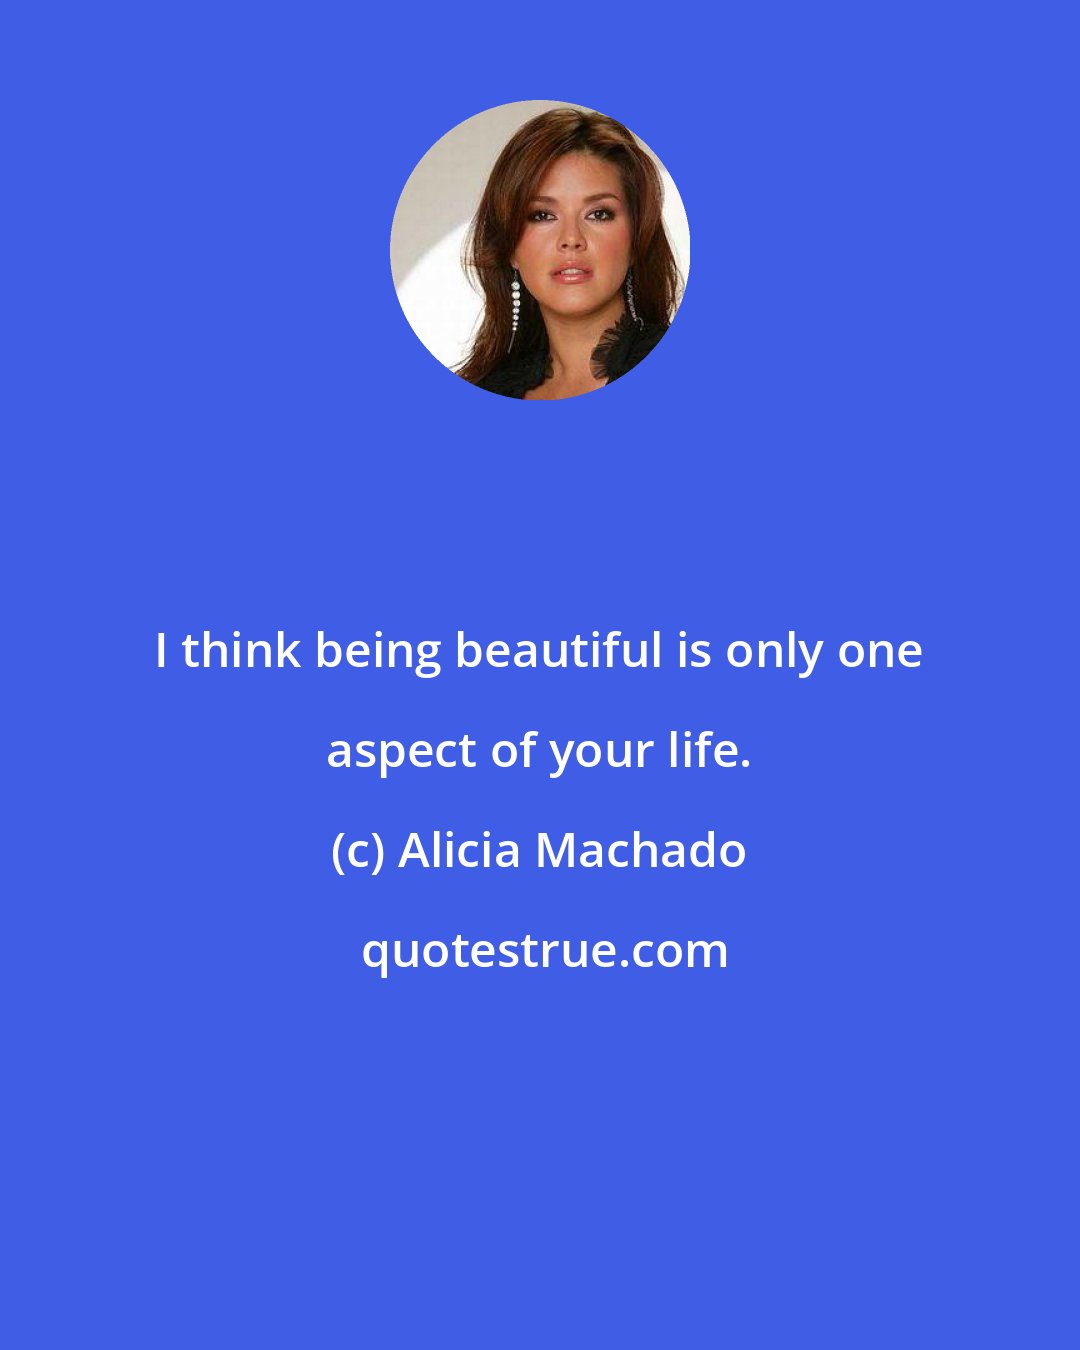 Alicia Machado: I think being beautiful is only one aspect of your life.